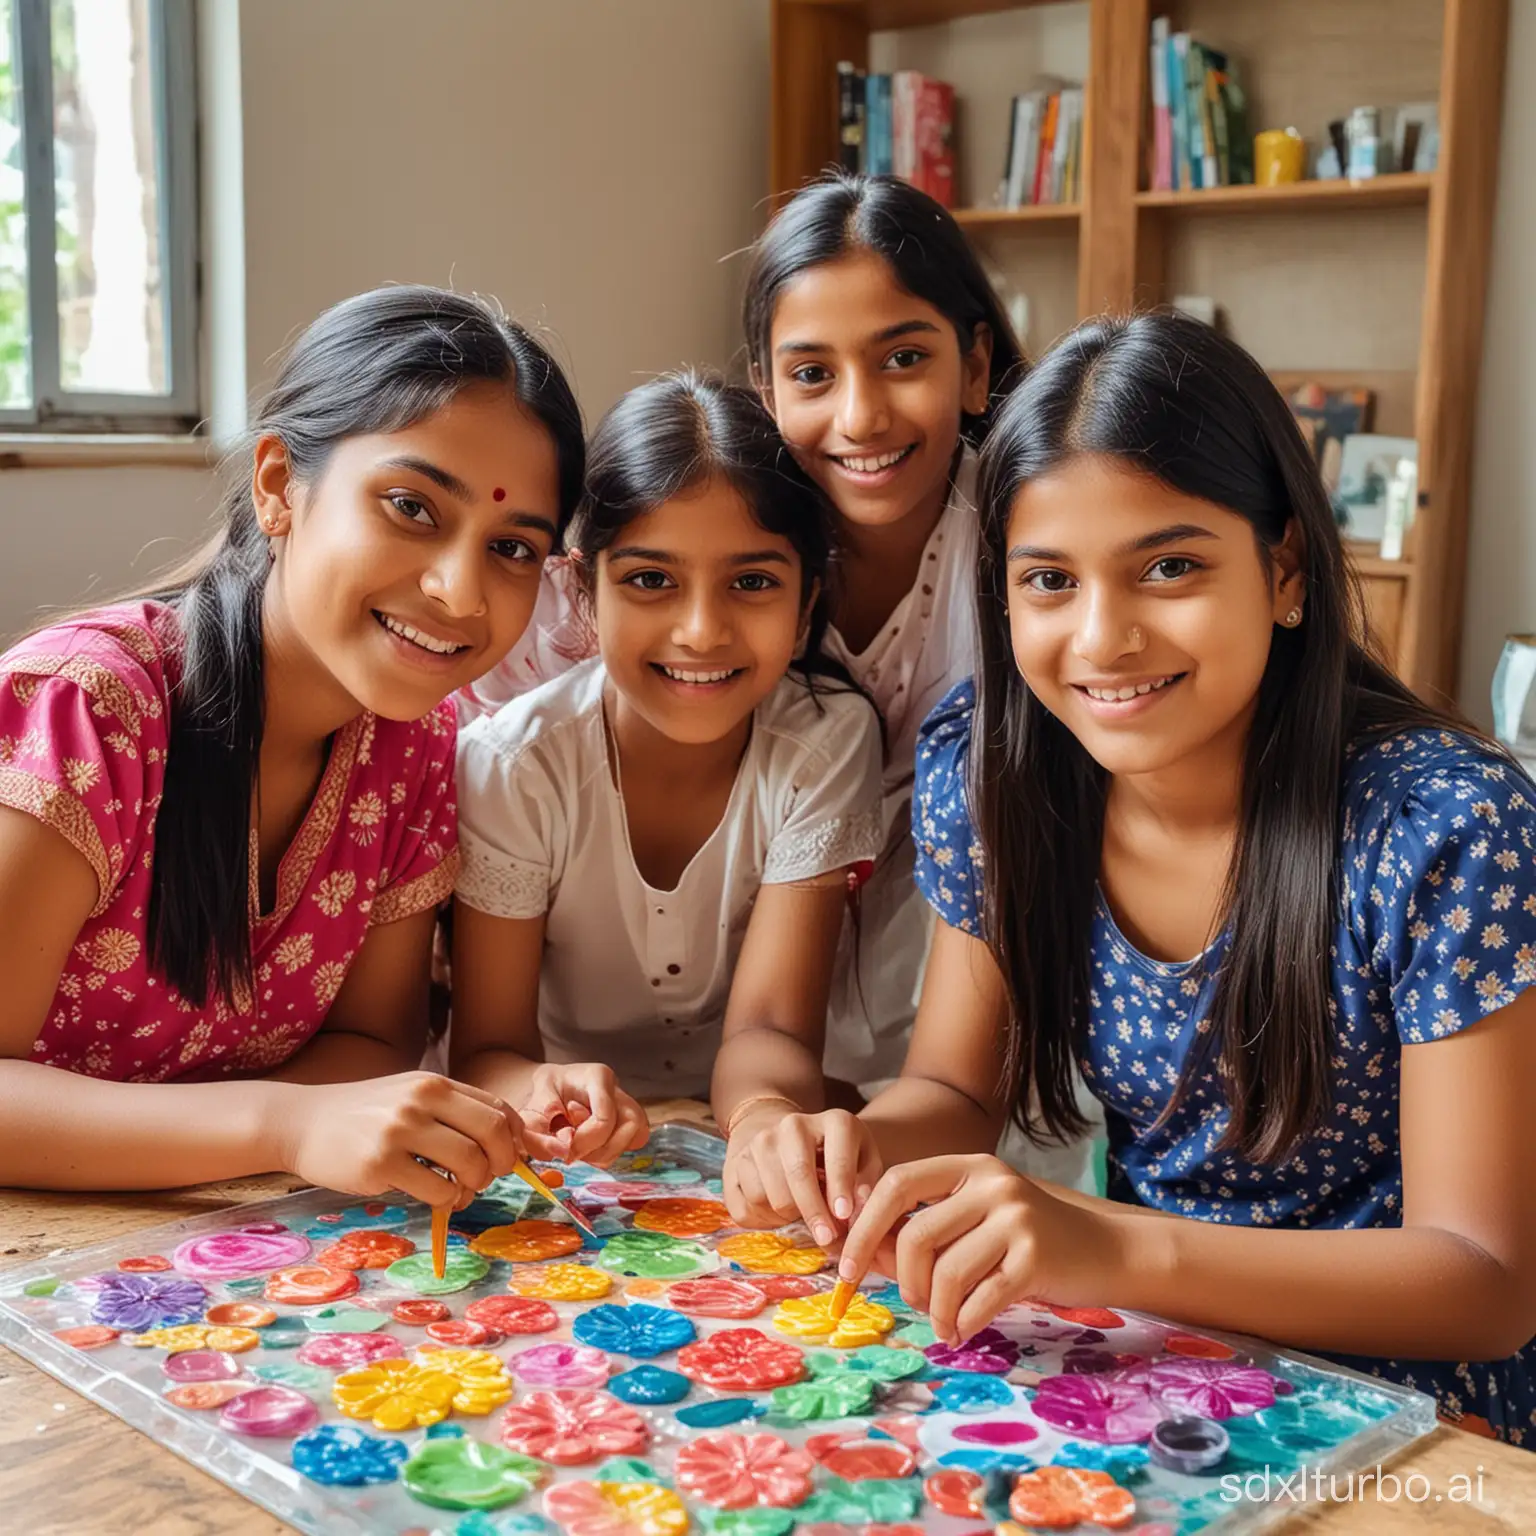 A group of cute Indian girls making resin art and showing their crafts